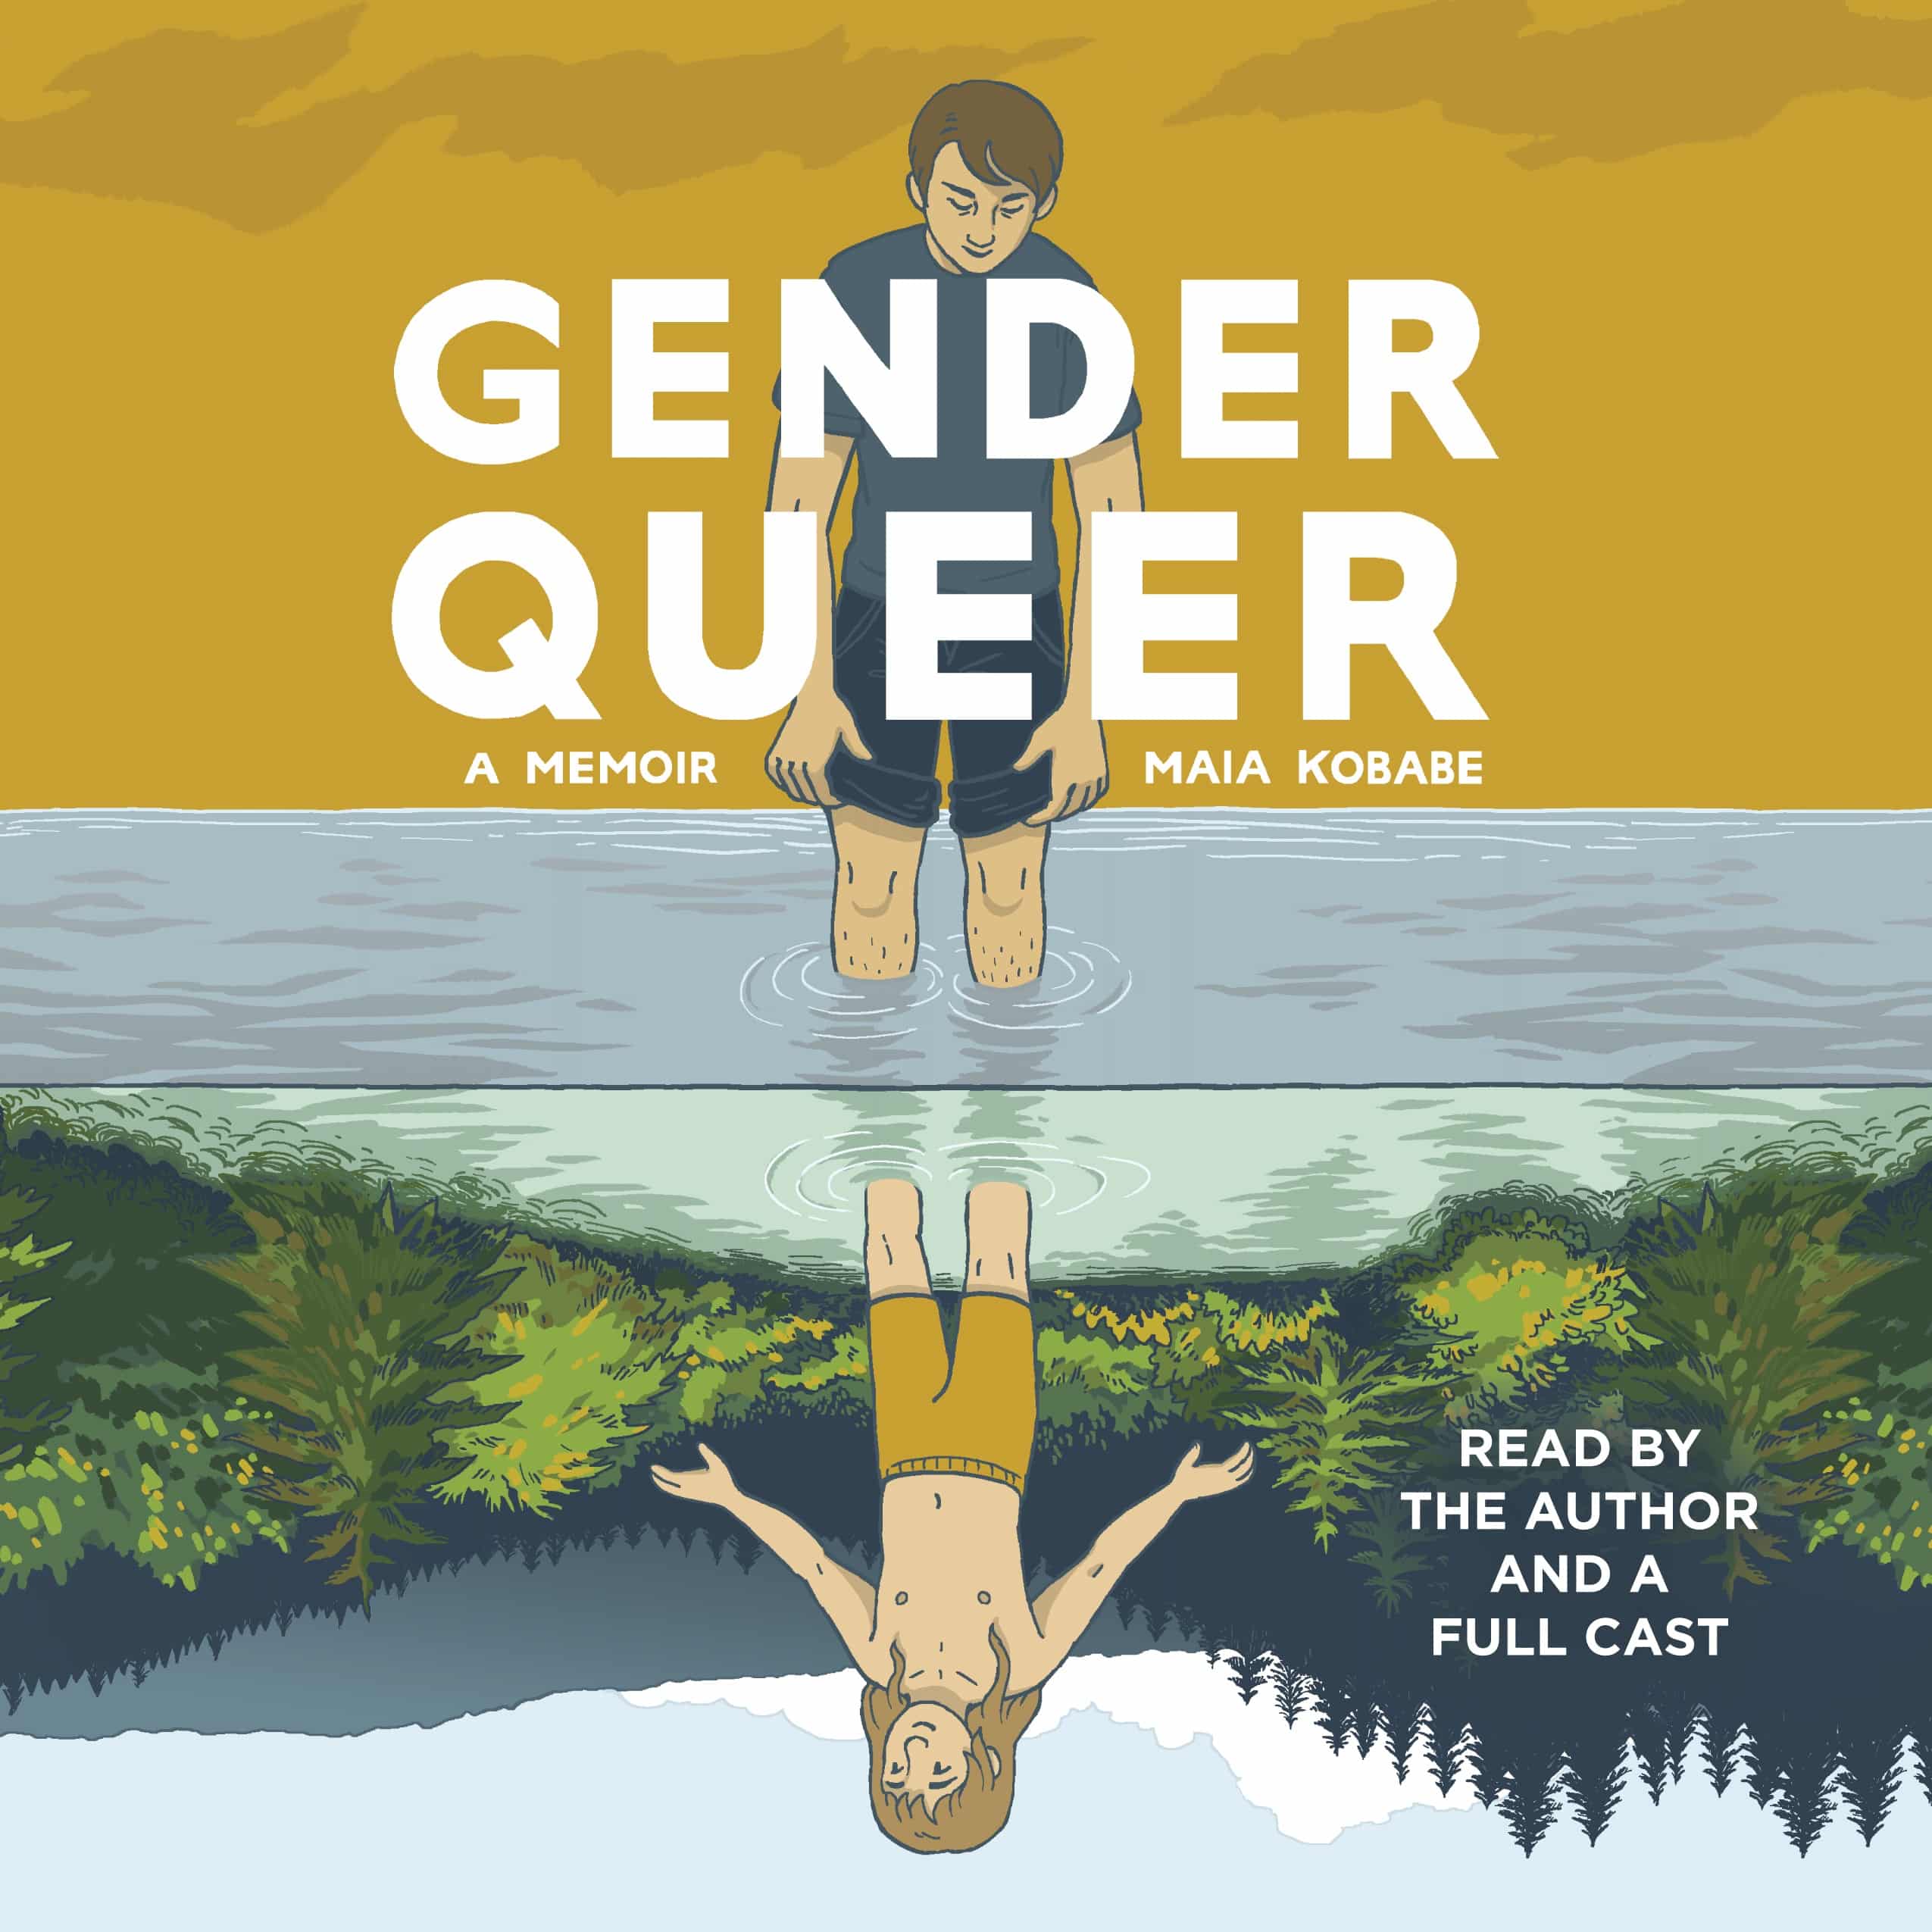 An audiobook adaptation of Gender Queer by Maia Kobabe